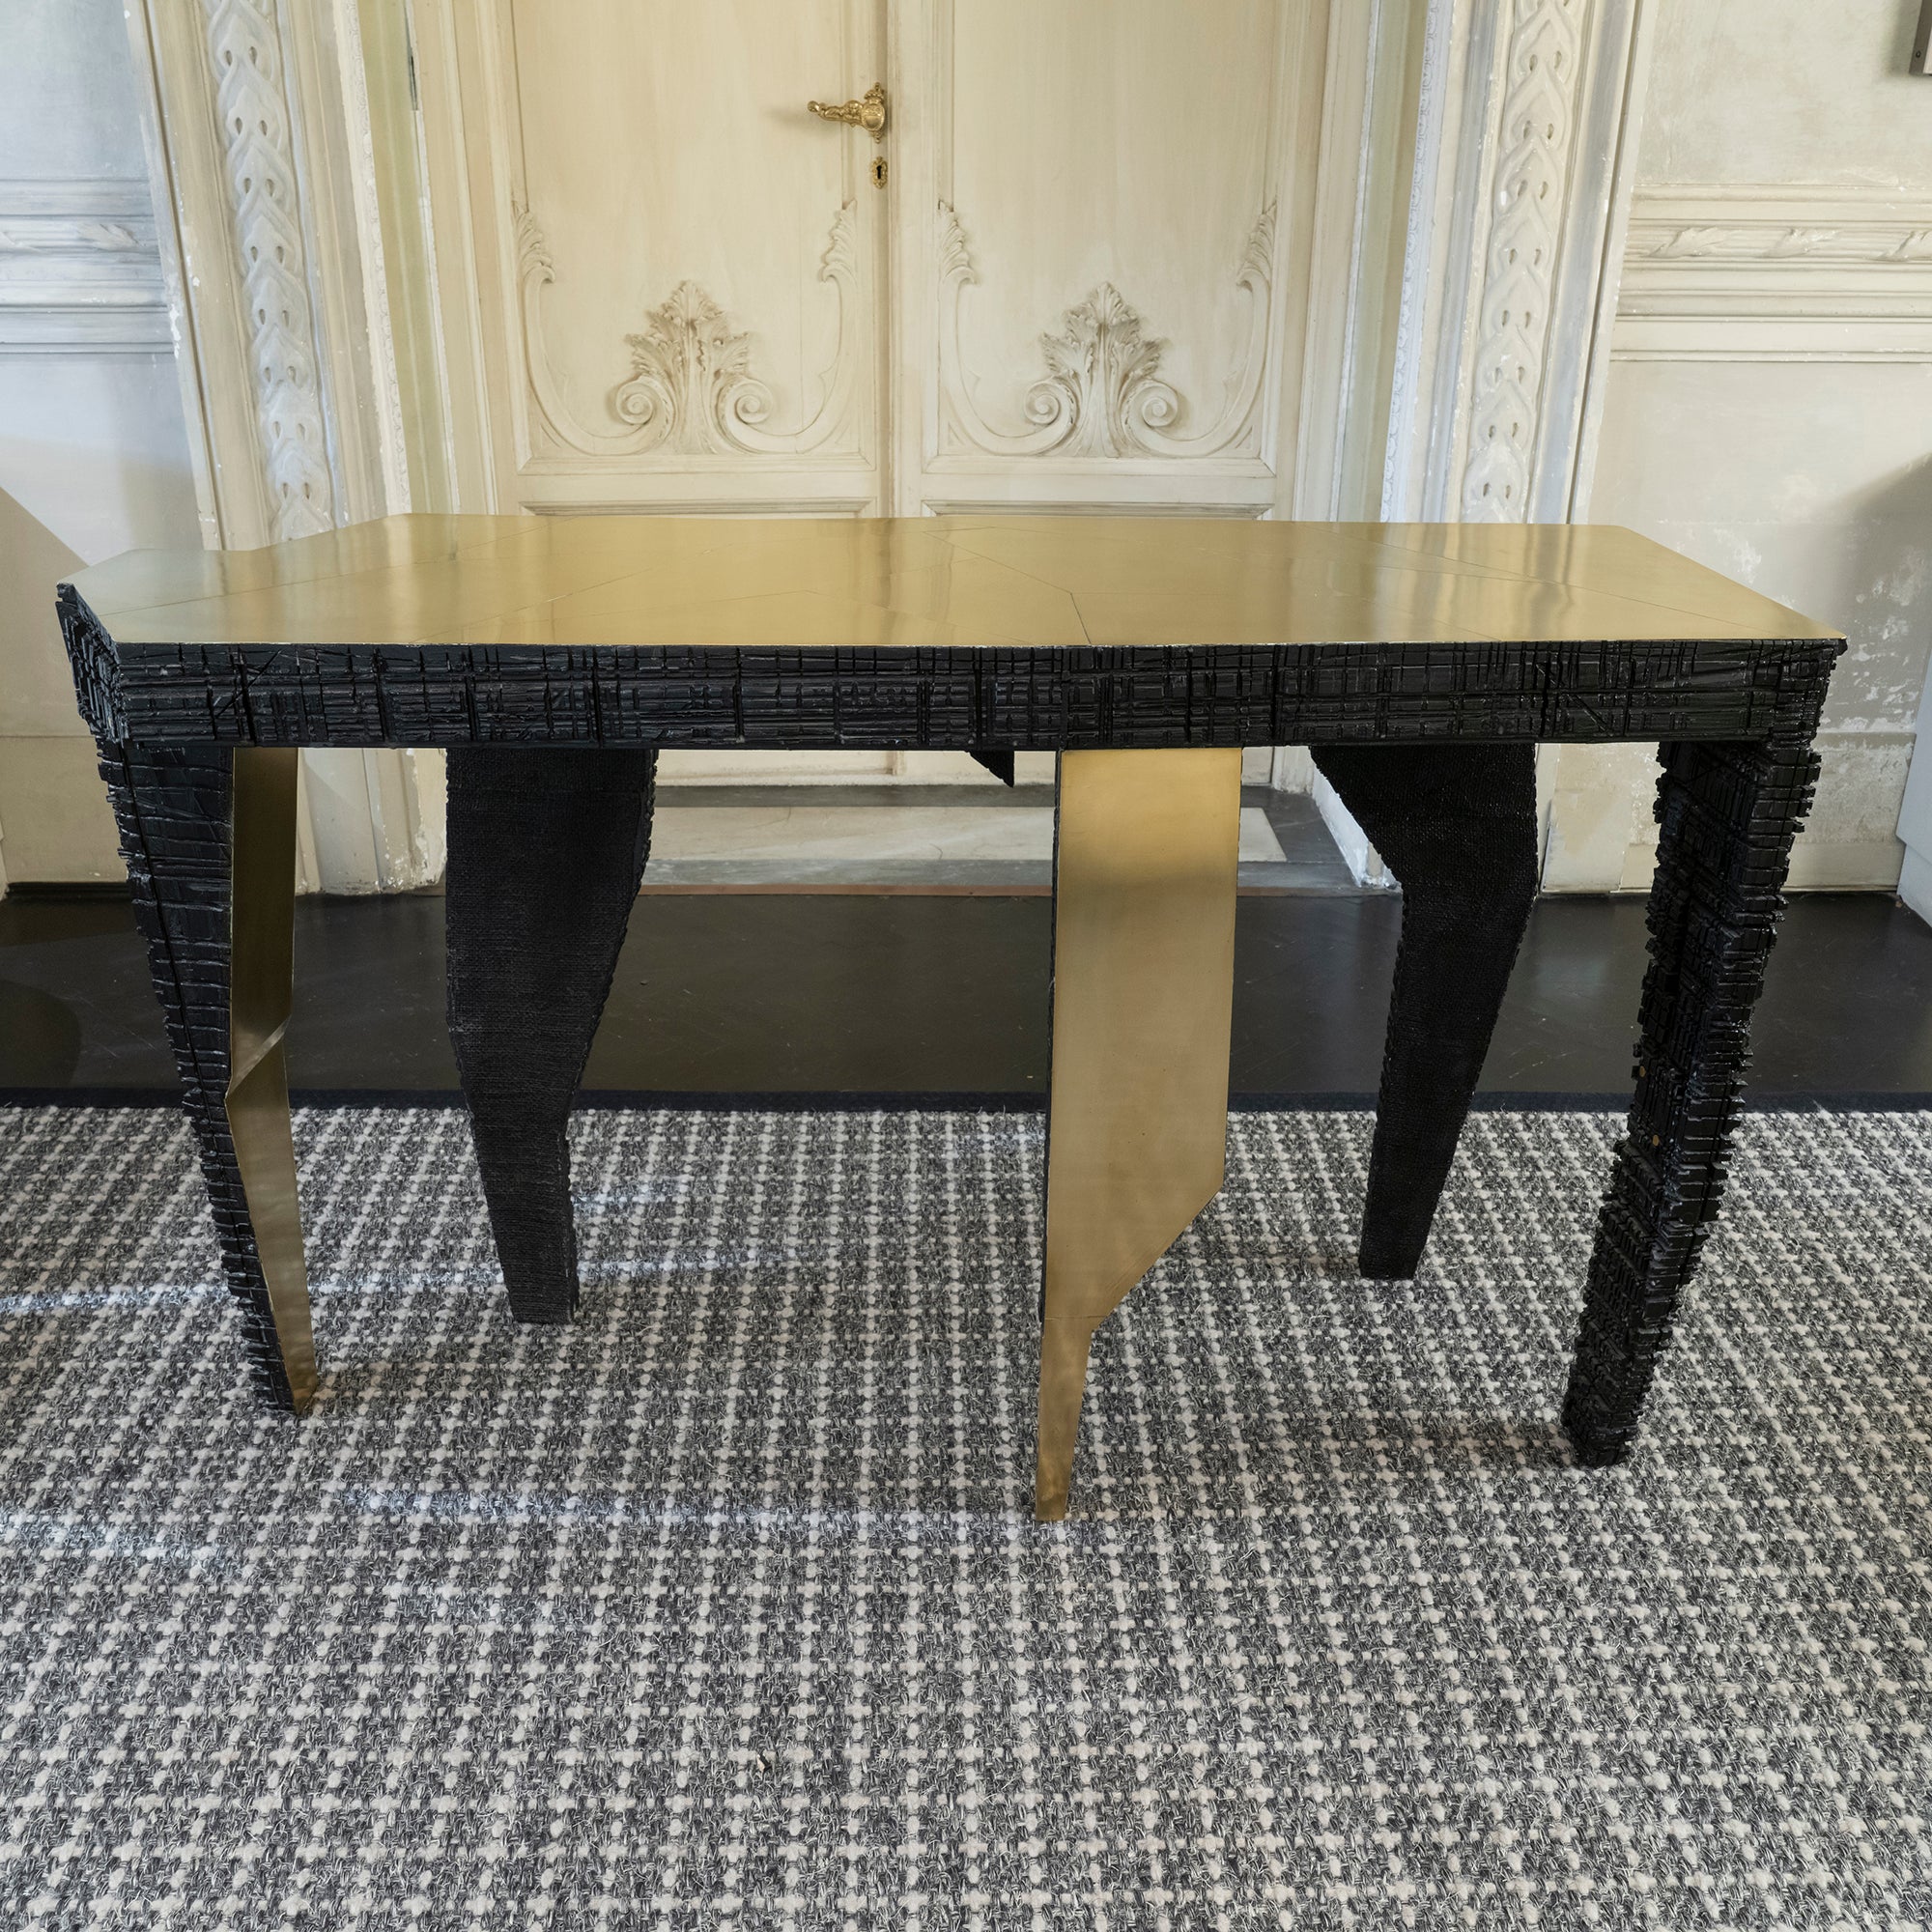 One of a kind original console table made of recycled hand carved wood and brass, vintage patina, designed by Alberto Tonni, Italy.